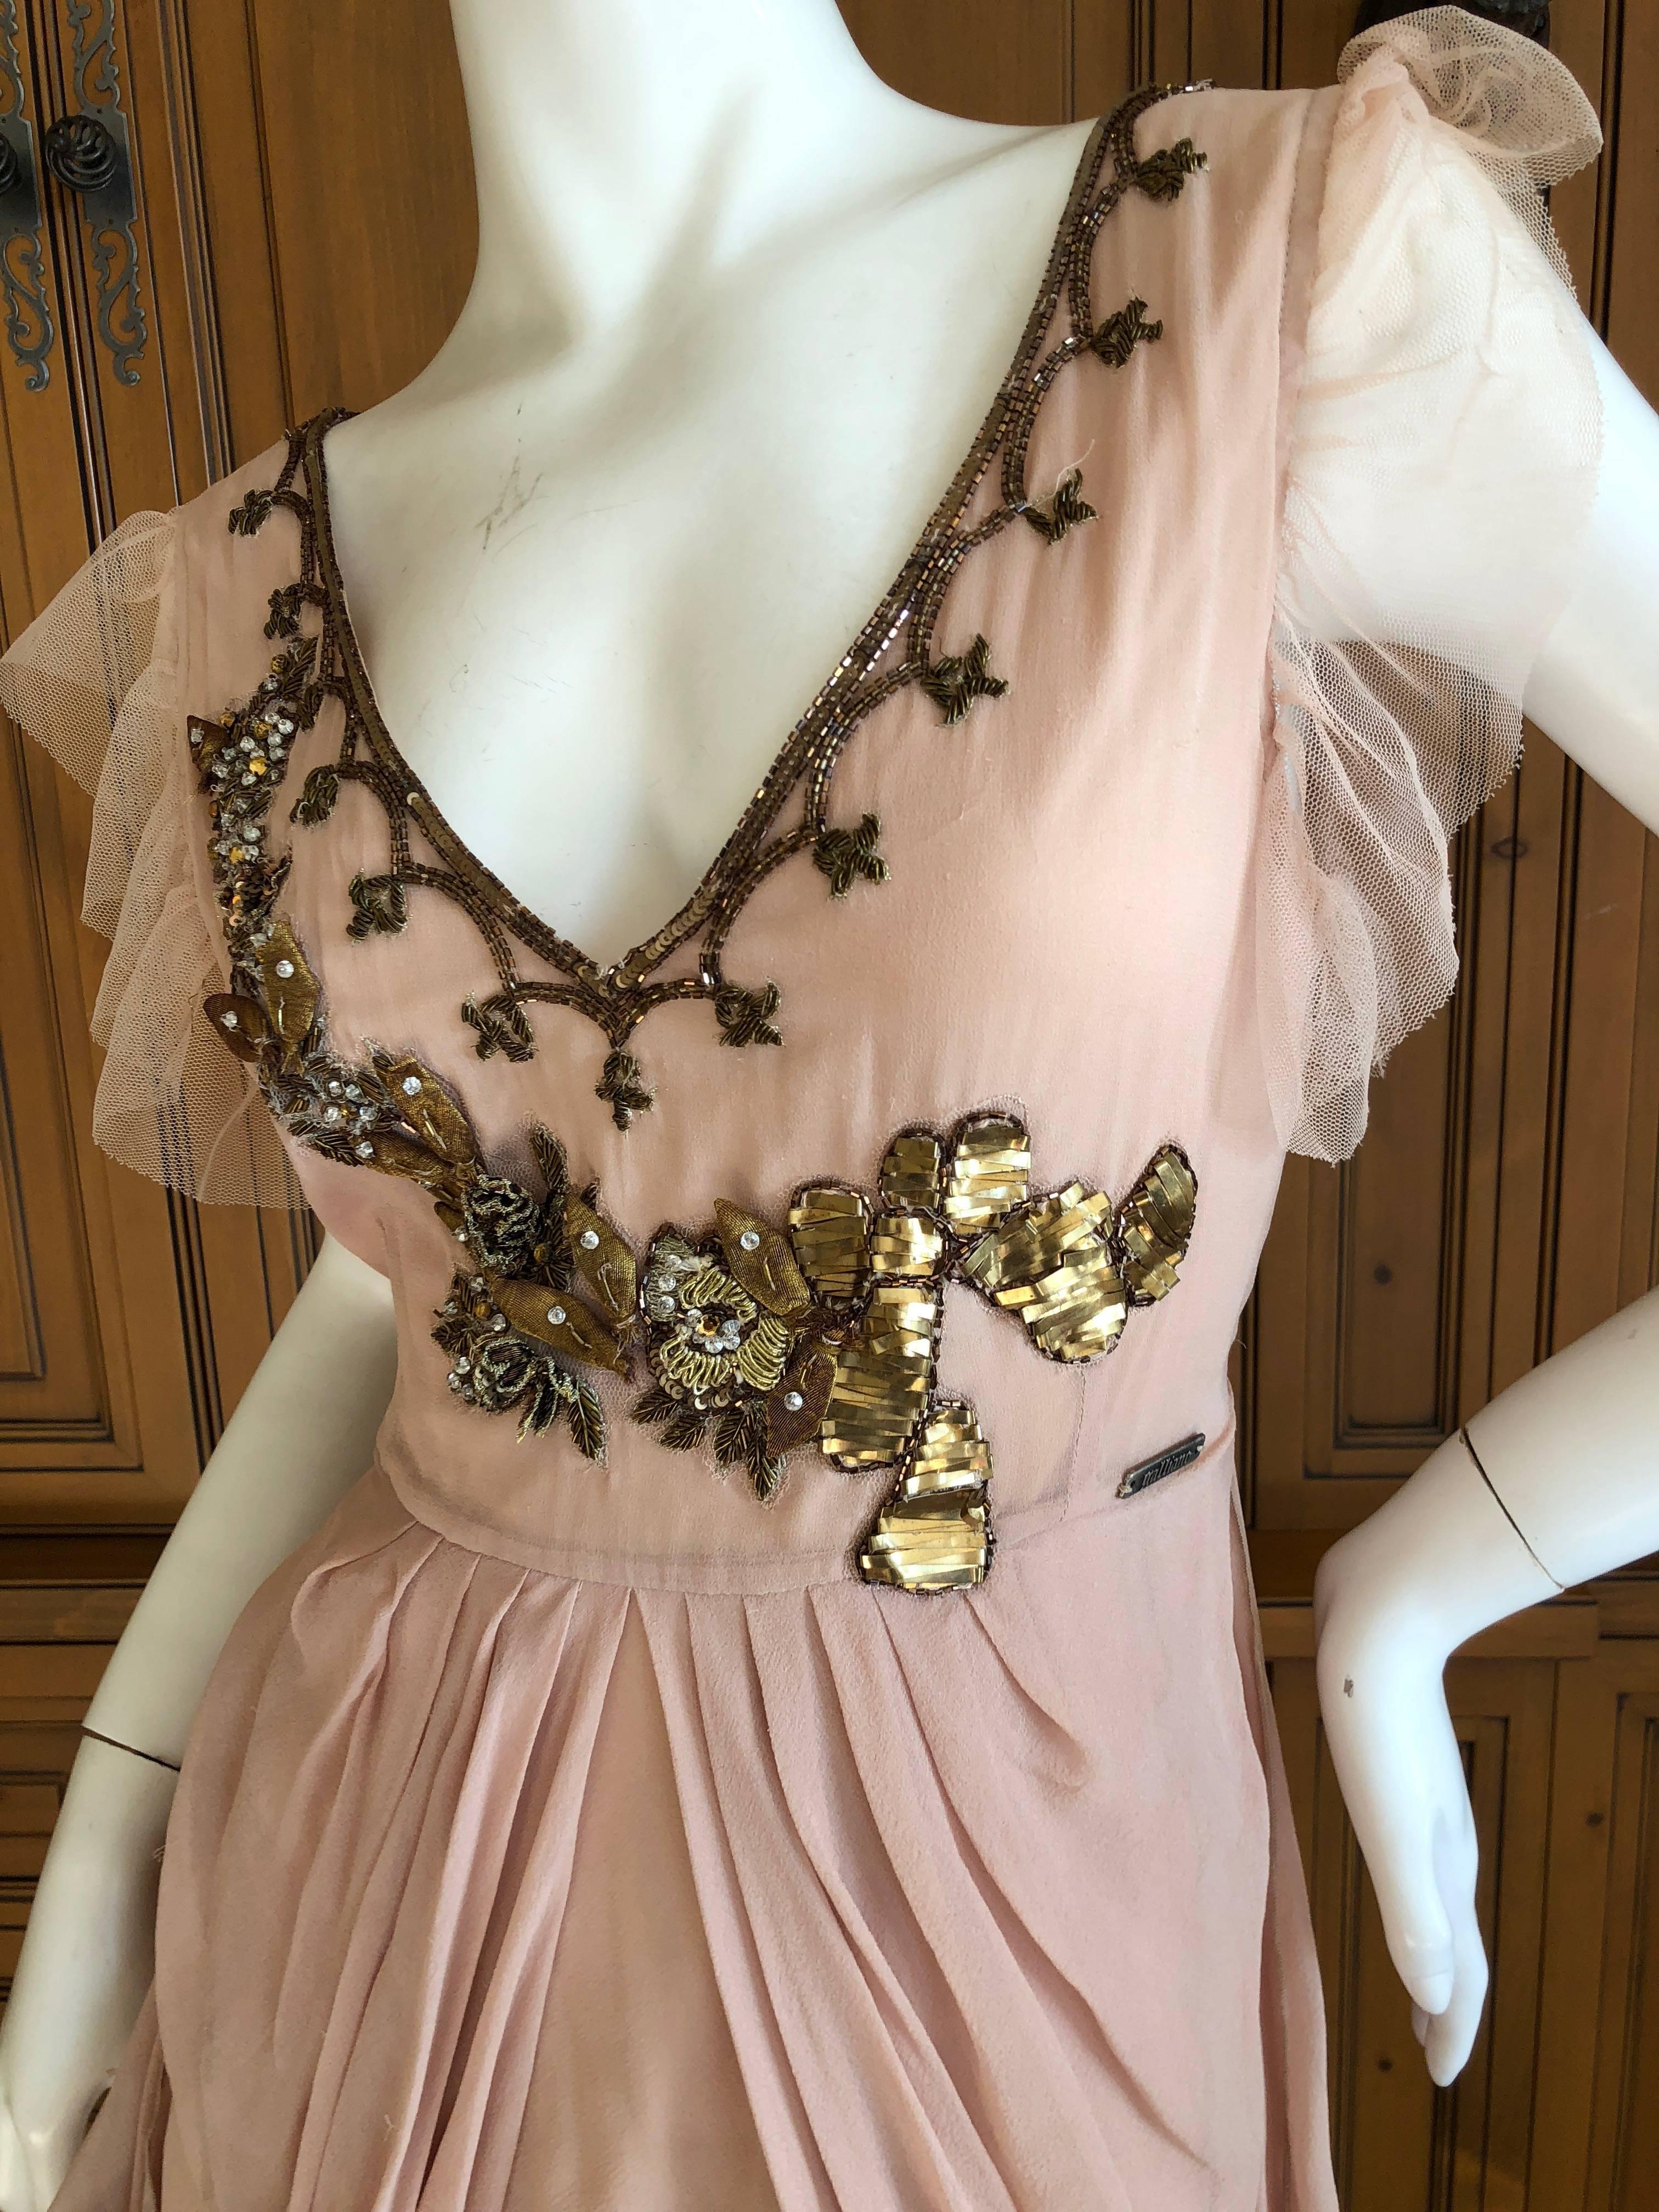 John Galliano Vintage Embellished Draped Cocktail Dress New With Tags In New Condition For Sale In Cloverdale, CA